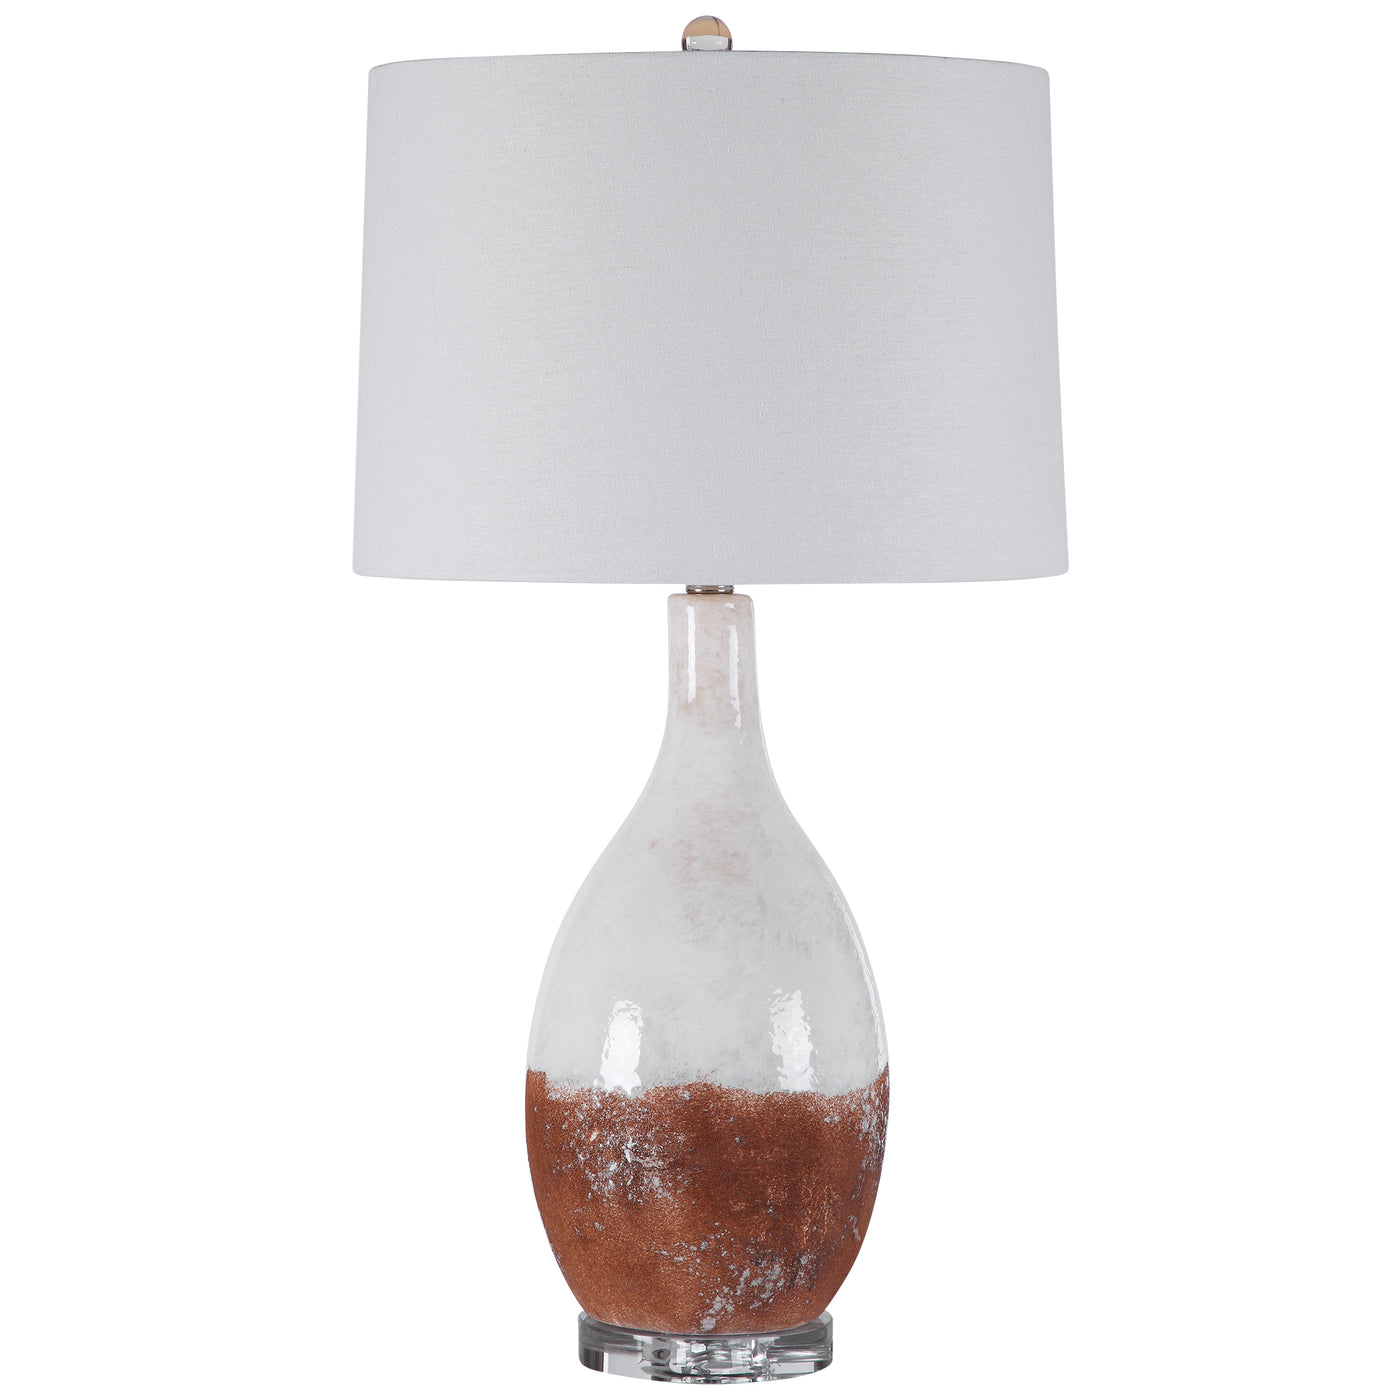 This Table Lamp Features A Ceramic Base Finished In An Earthy Terracotta Rust That Transitions Into A Crackled Aged White ...